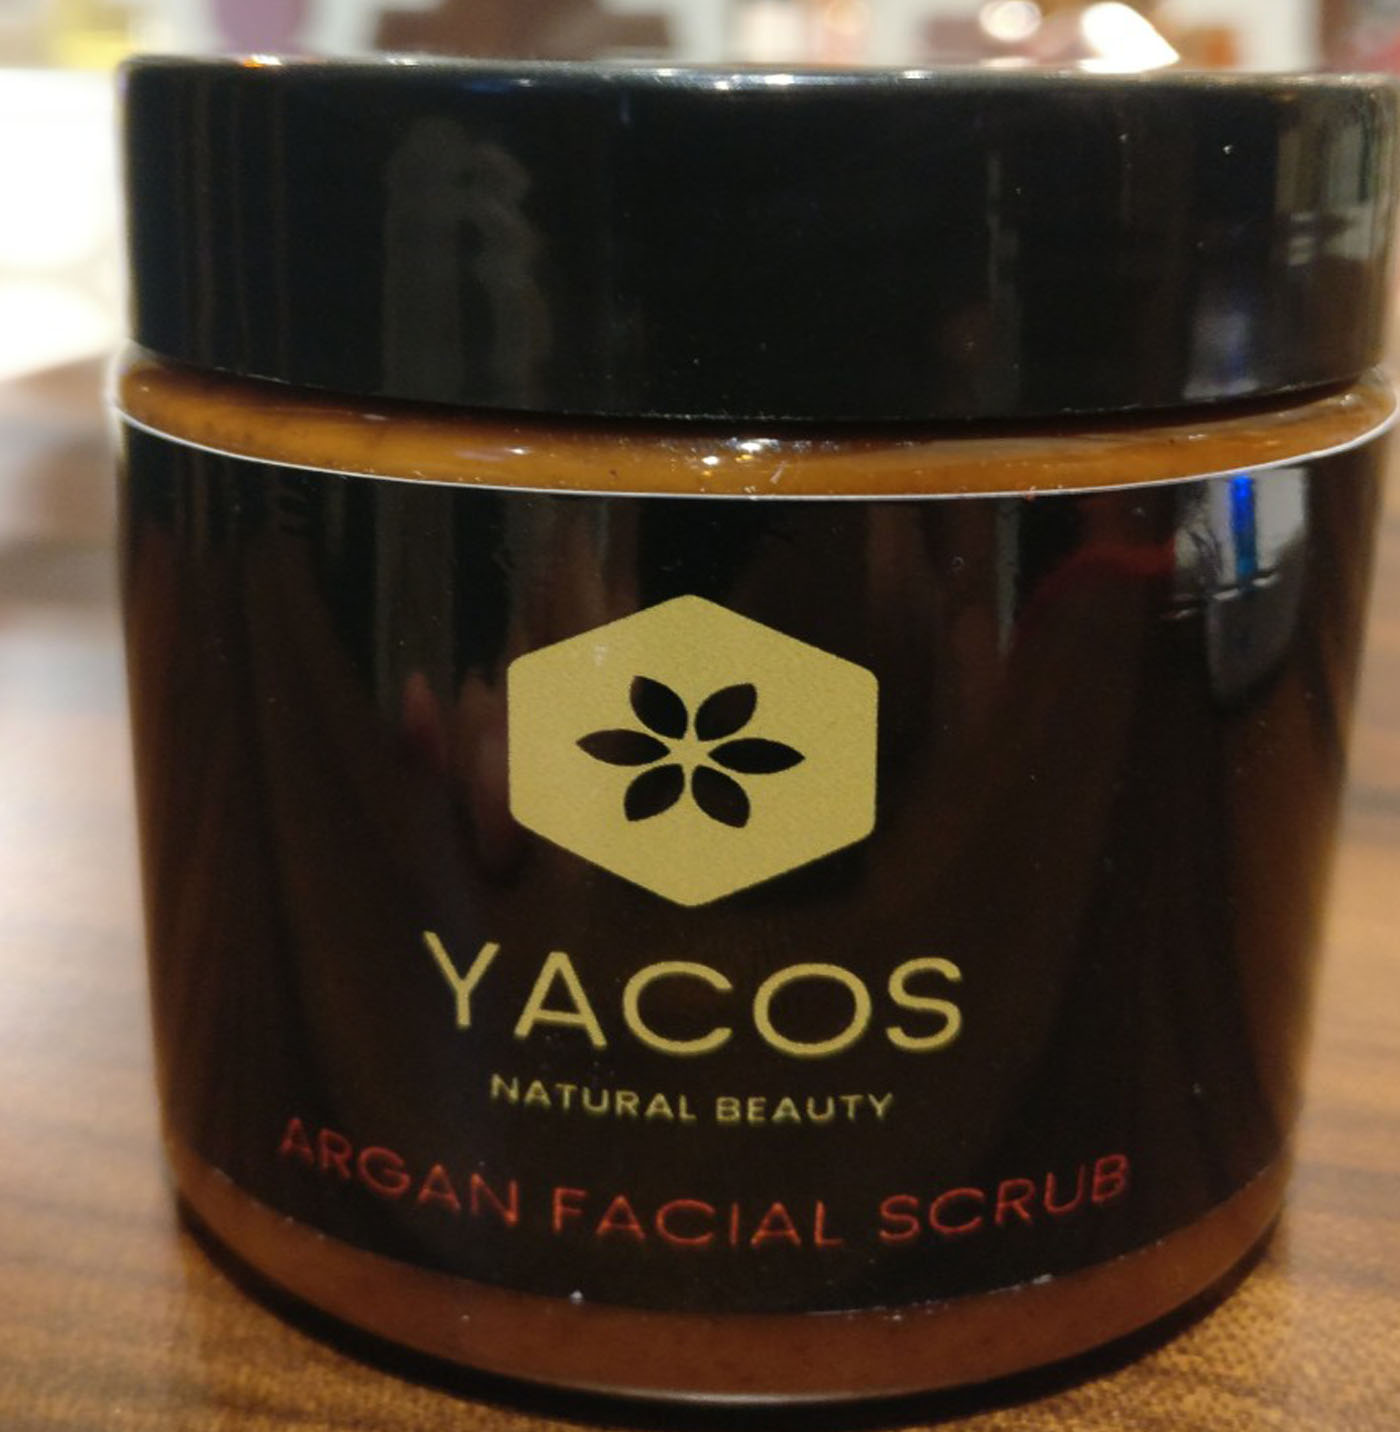 Yacos Face scrub with Argan Oil and Prickly Pear